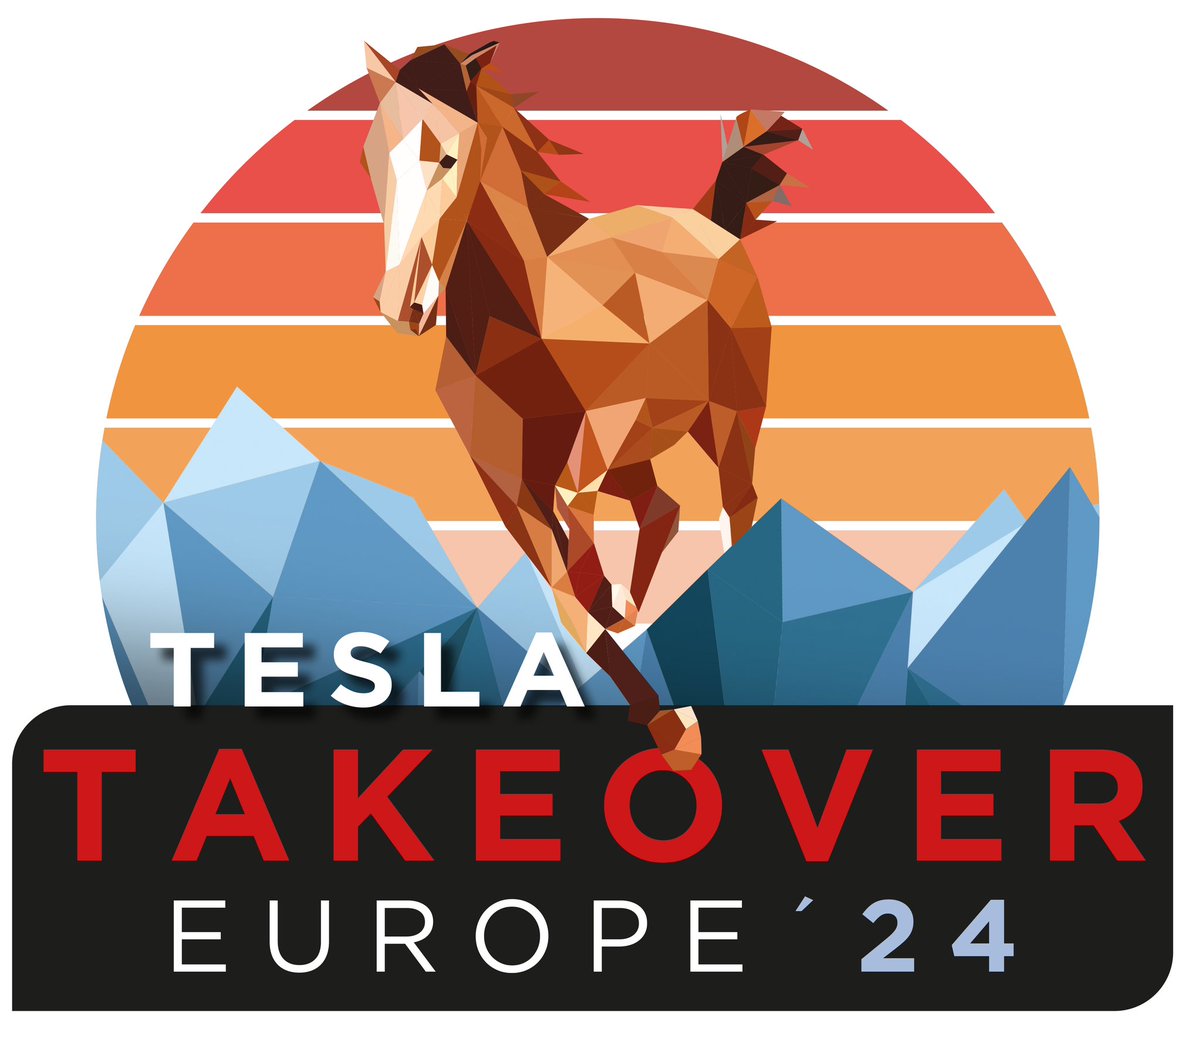 Wiiihaa: Feel the Horse Power 🐴😂
🚀 See you at the Tesla Takeover in Flachau / Salzburg 🏔️T-16 days